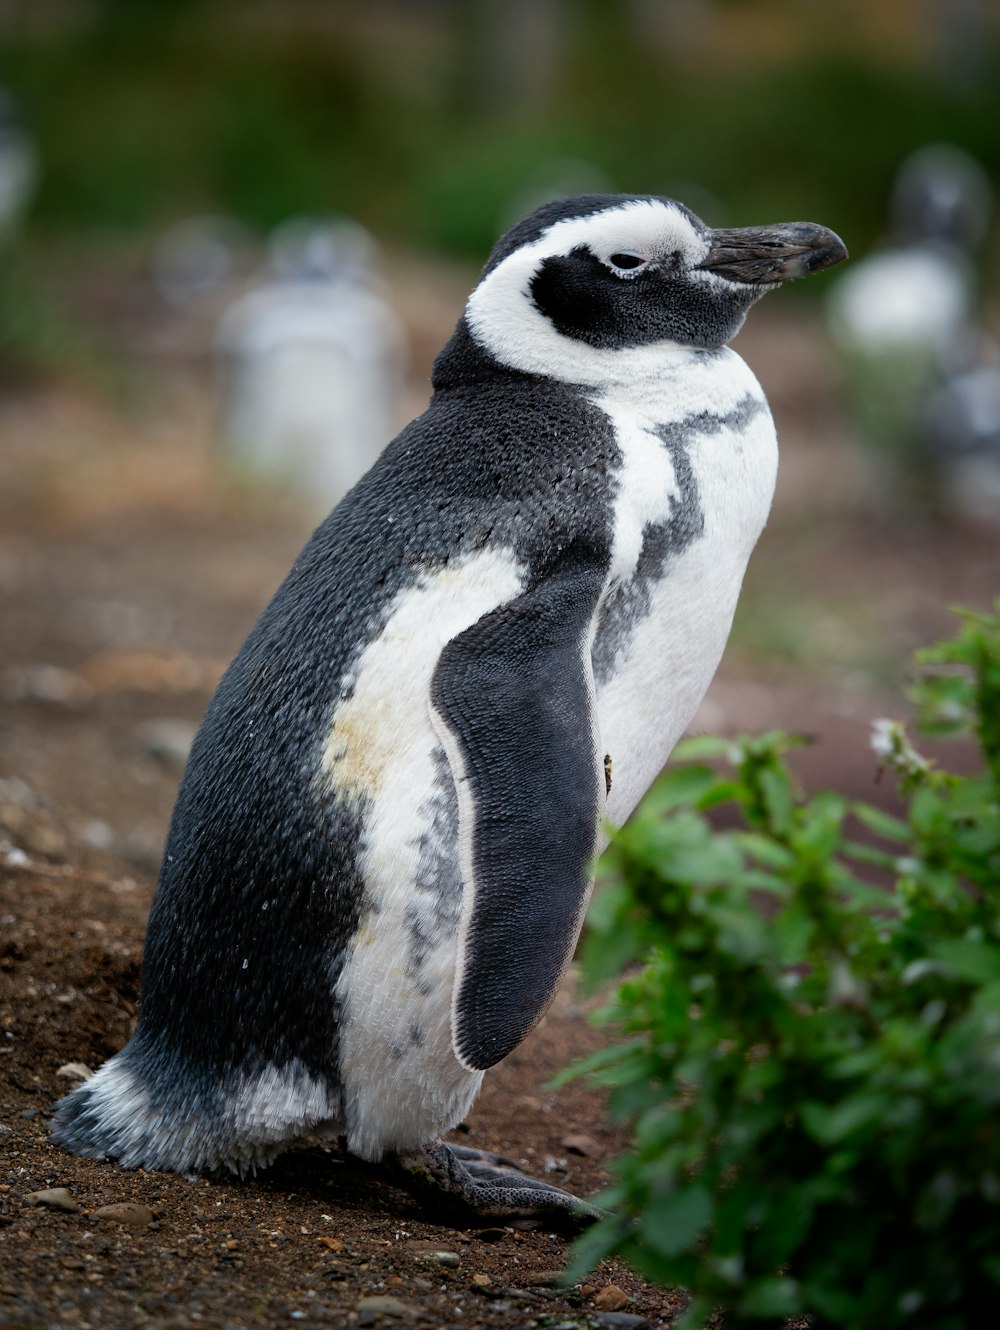 a black and white penguin standing on top of a dirt field